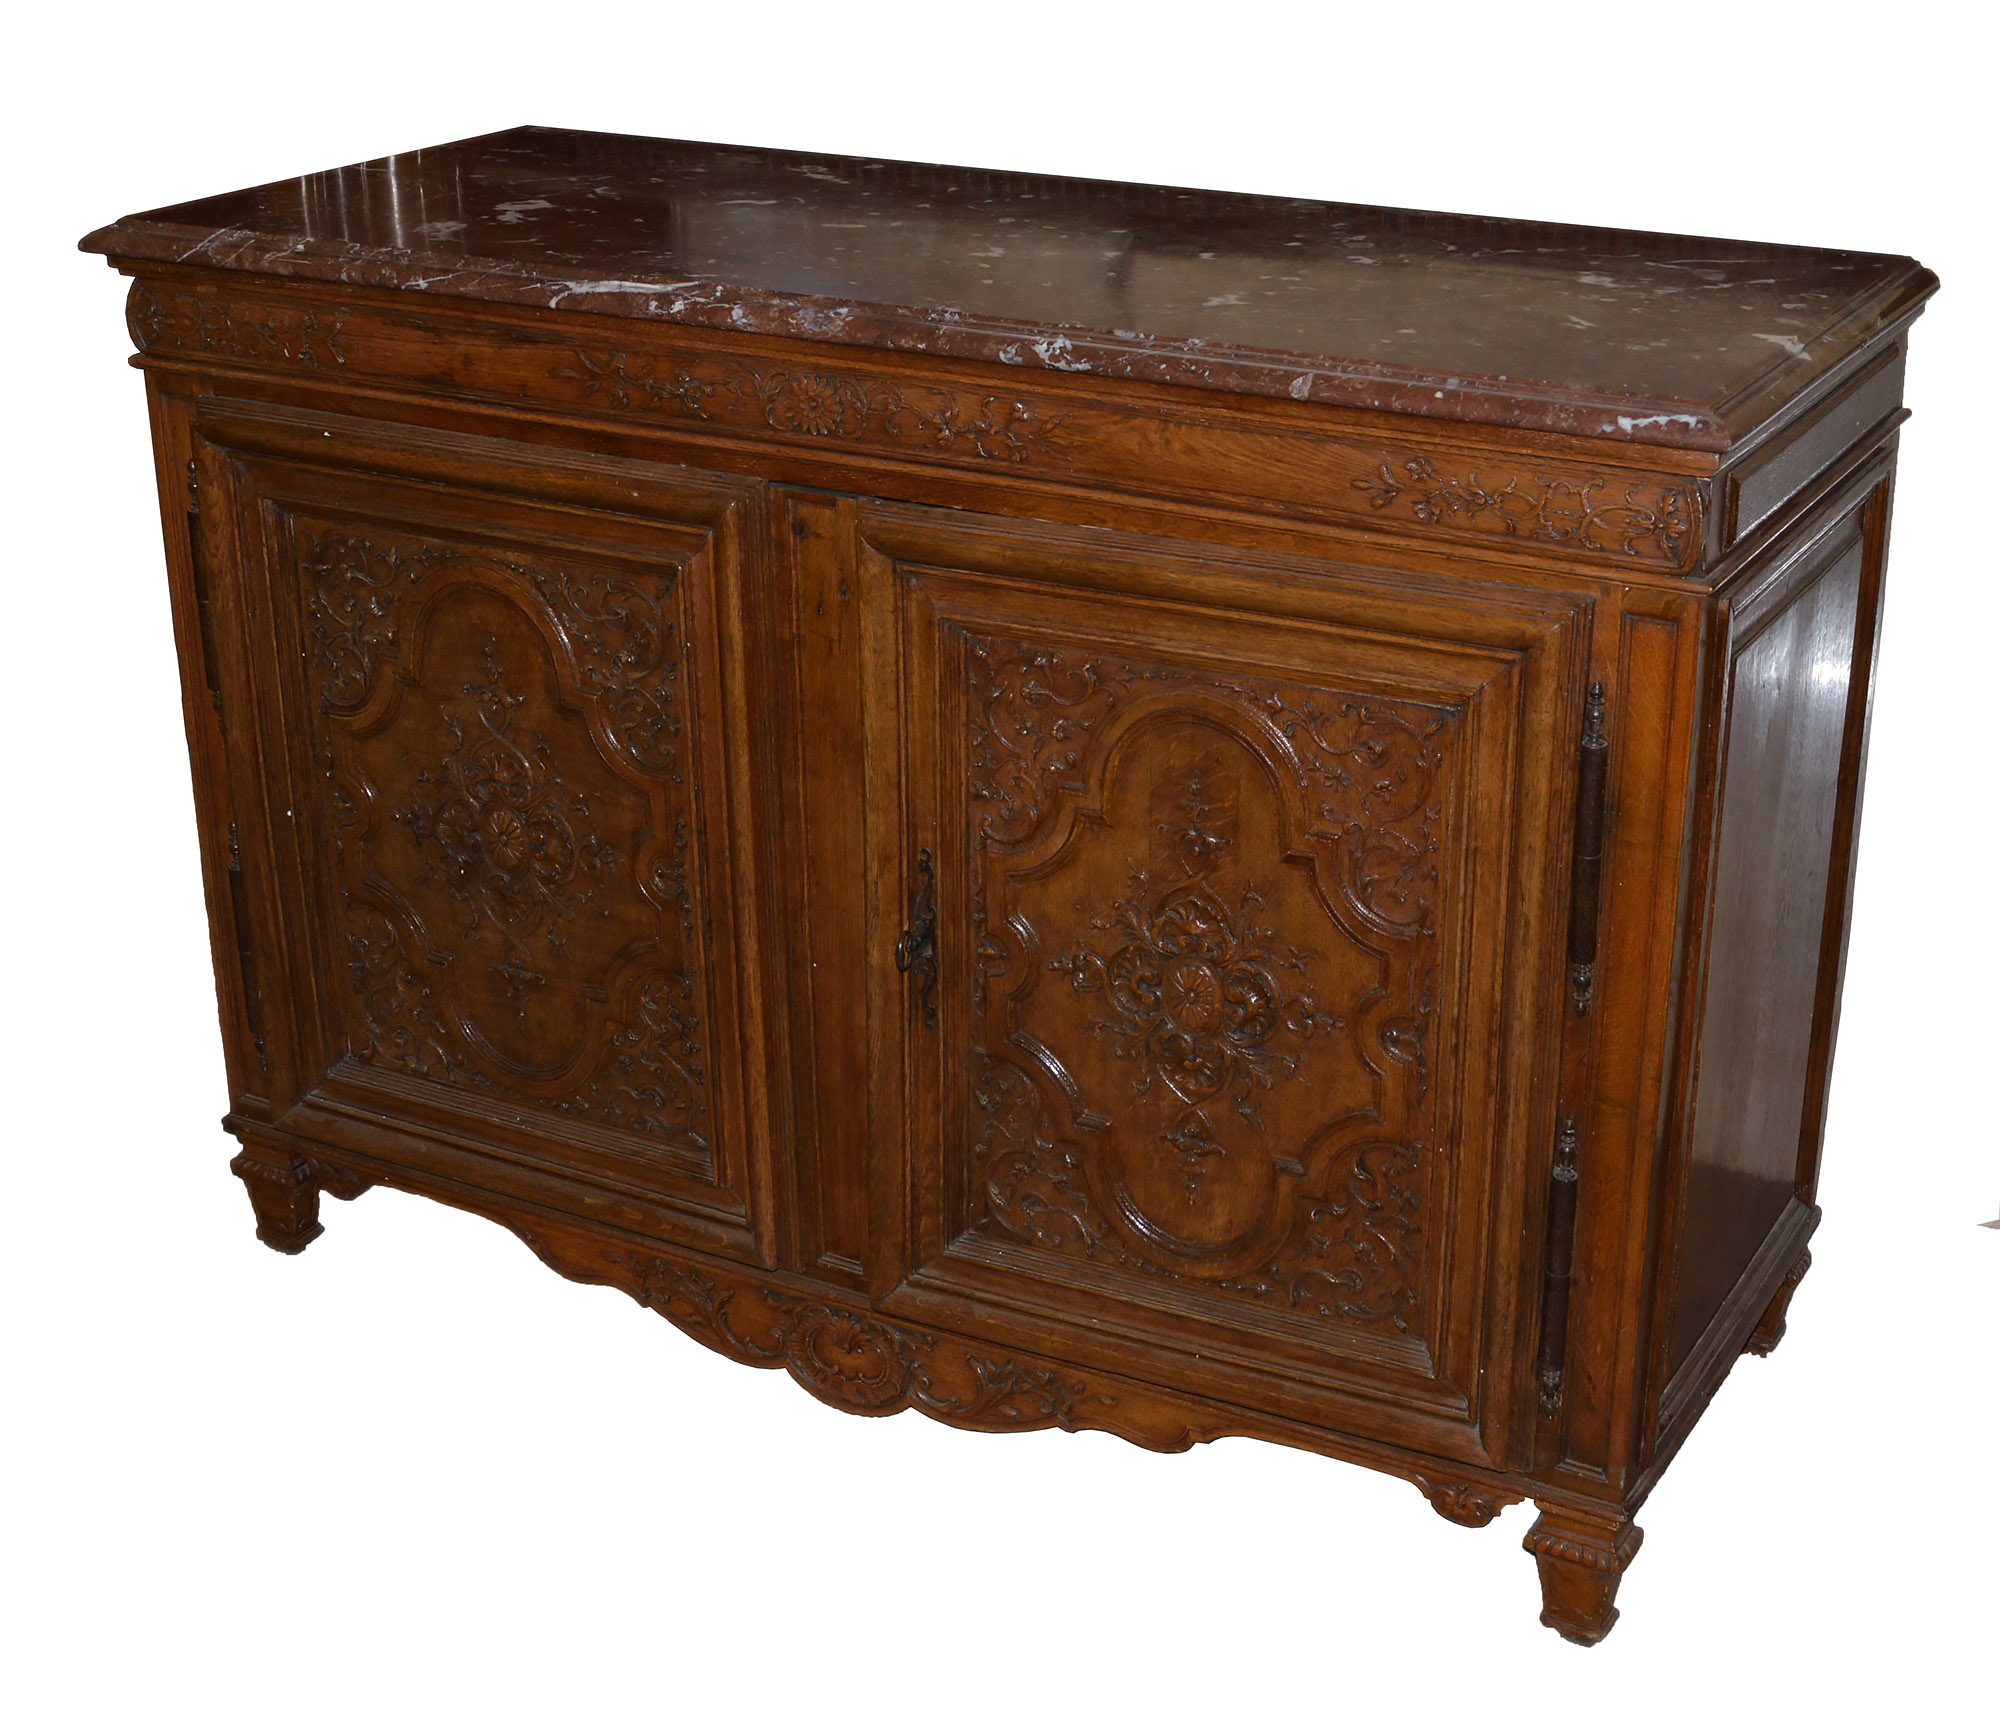 Very fine, French, Regence period buffet de chasse